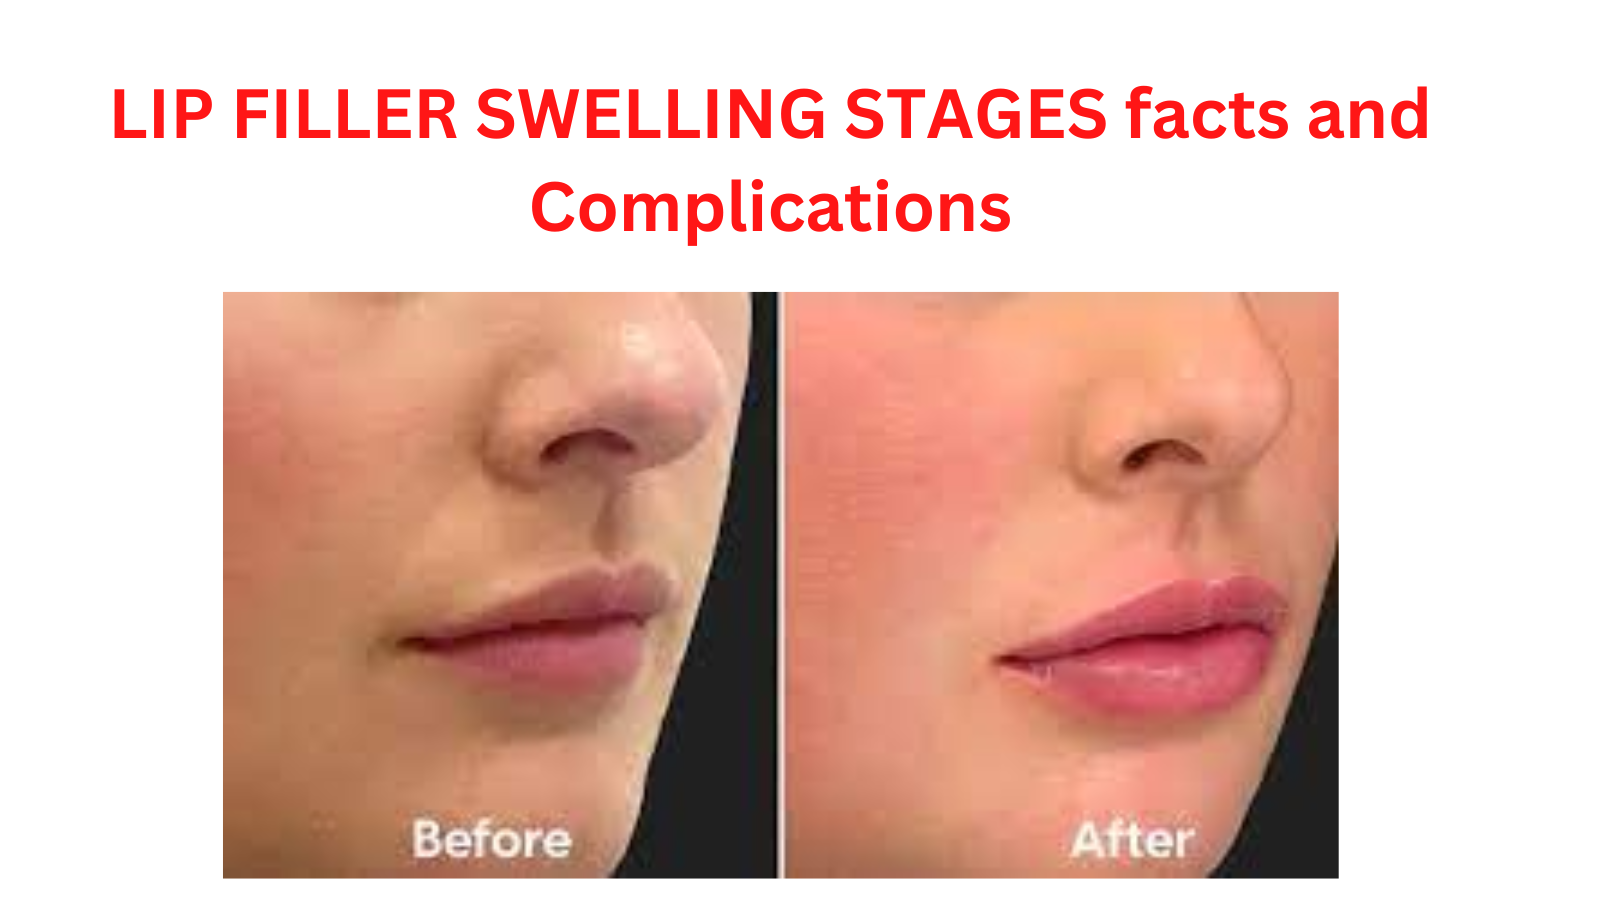 LIP FILLER SWELLING STAGES facts and Complications